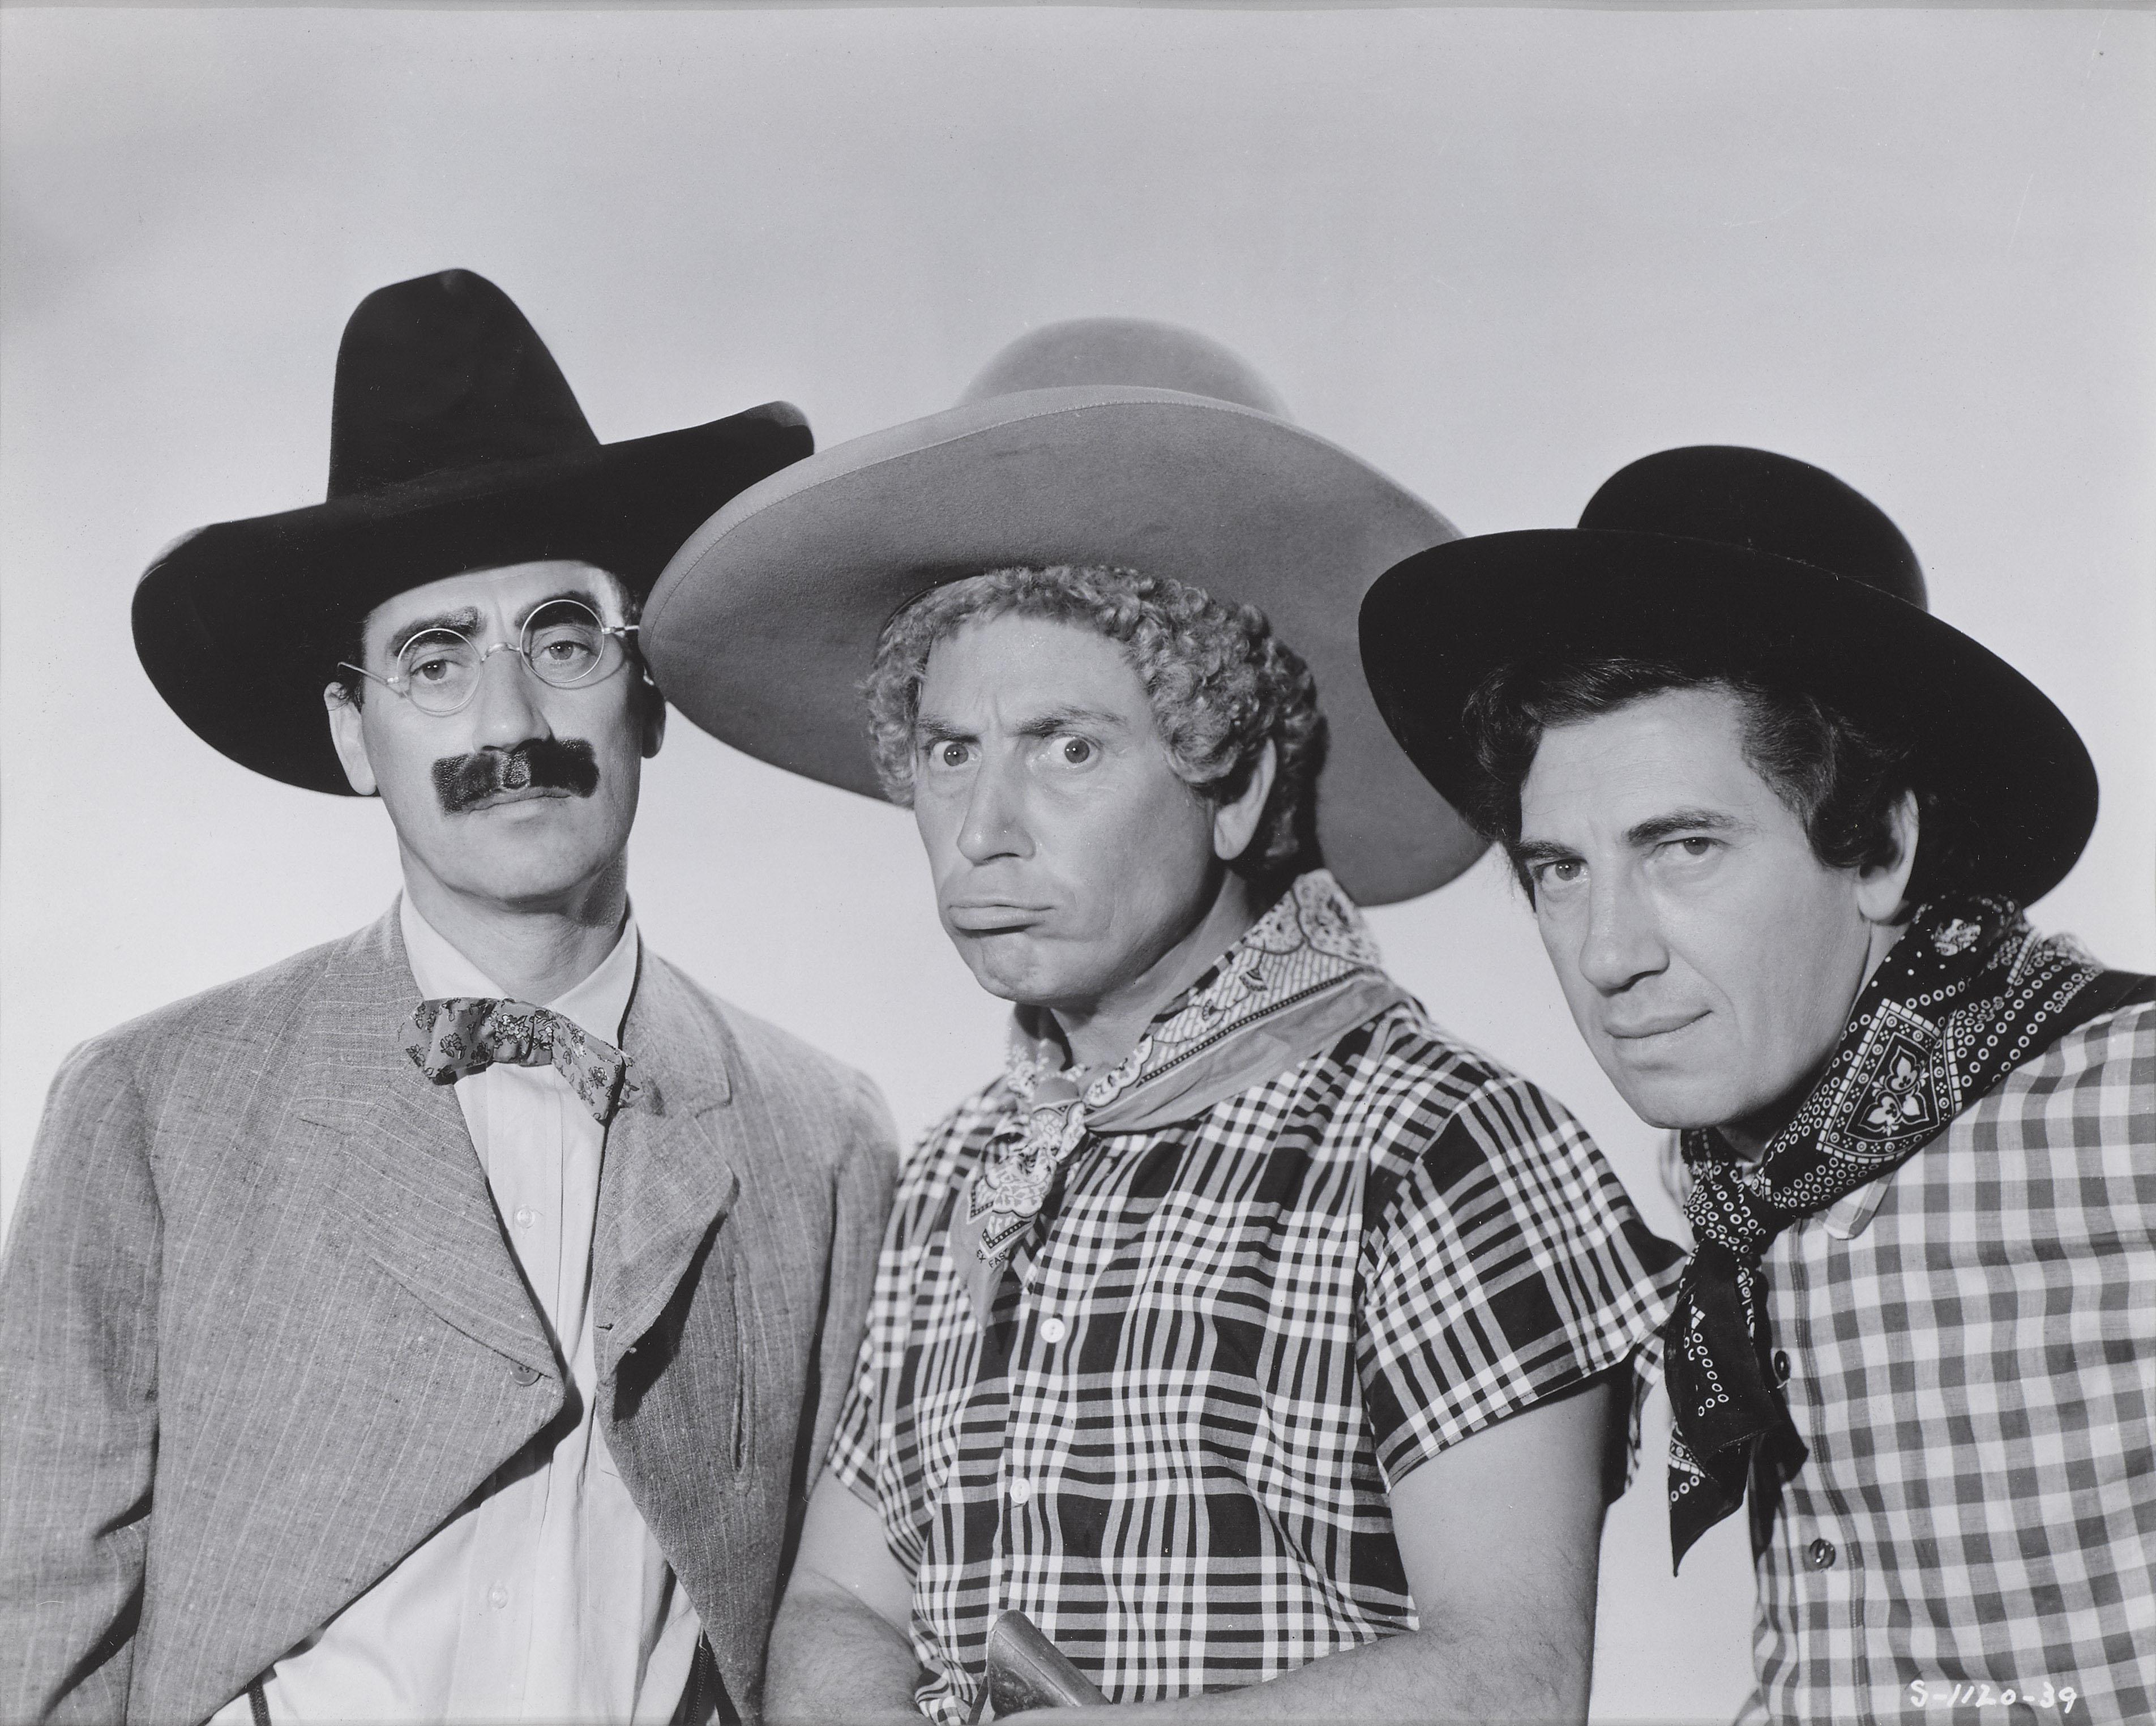 Original photographic production still for the American comedy Go West directed by Edward Buzzell and starring Groucho Marx, Chico Marx and Harpo Marx.
This piece is conservation framed in a Obeche wood frame with acid free card mount and UV